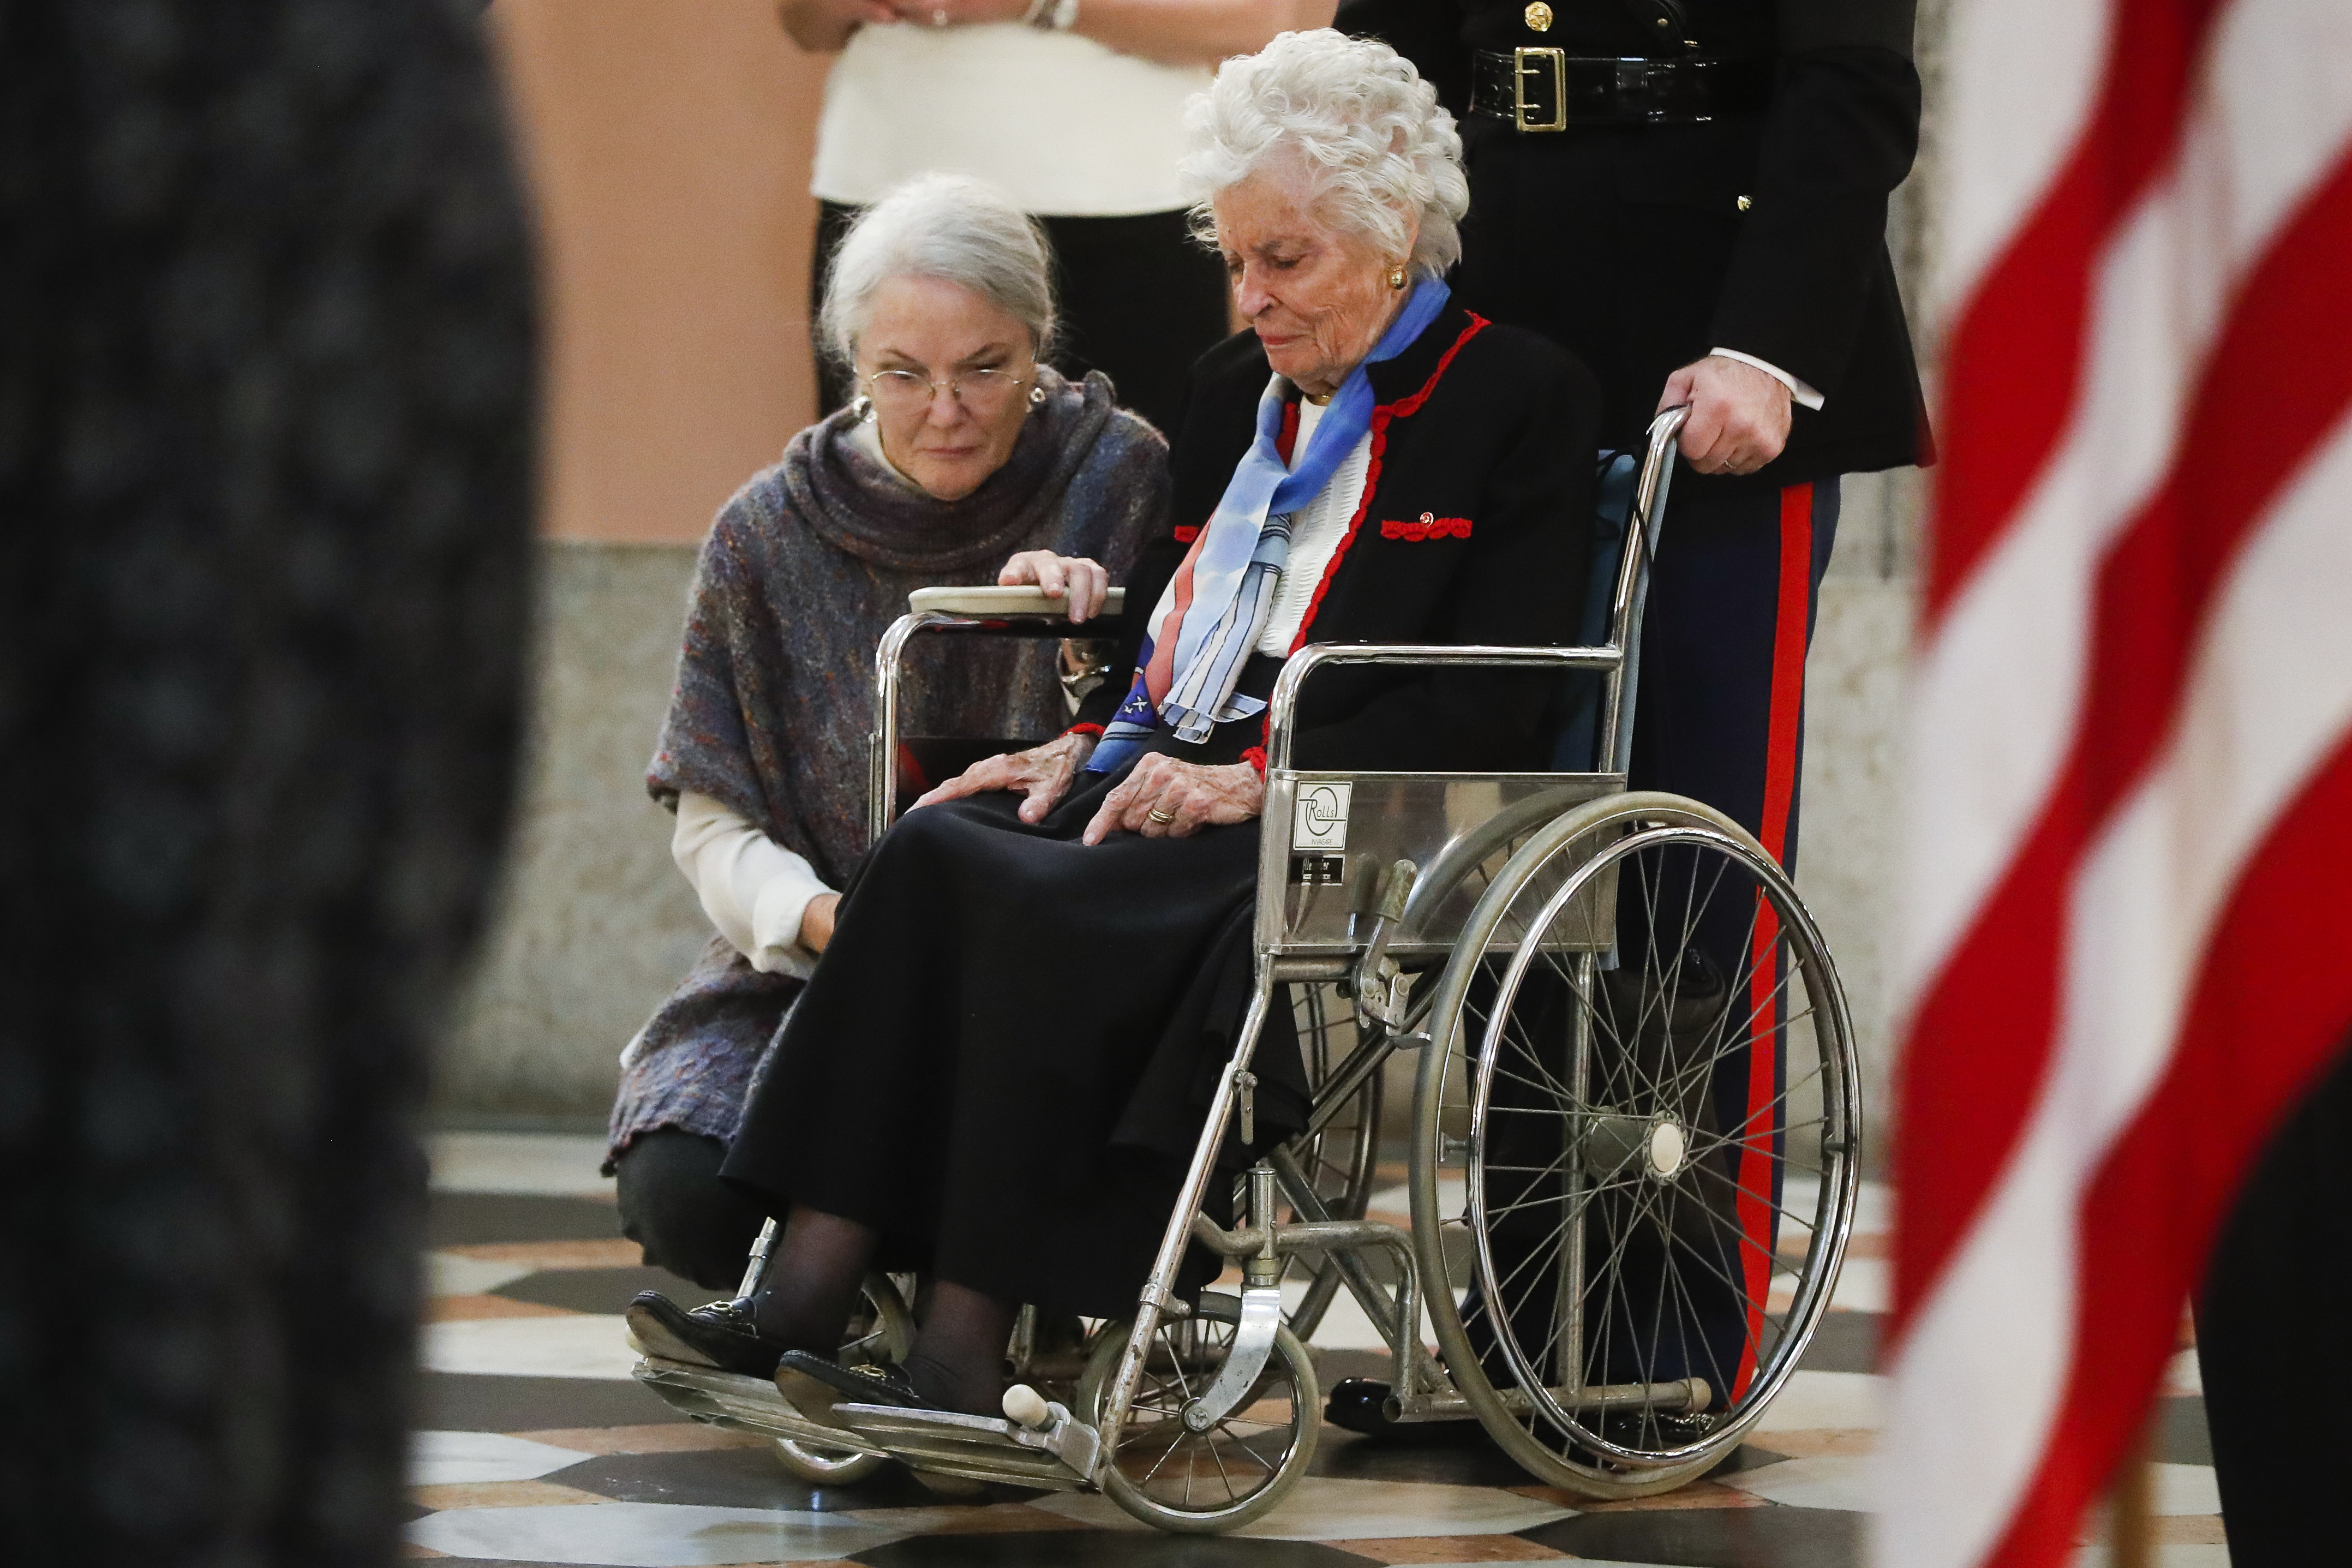 Annie Glenn, center right, pauses after viewing her husband John Glenn's casket alongside her daughter Carolyn Ann Glenn, center left, as he lies in honor, Friday, Dec. 16, 2016, in Columbus, Ohio. Glenn's home state and the nation began saying goodbye to the famed astronaut who died last week at the age of 95. (AP Photo/John Minchillo)